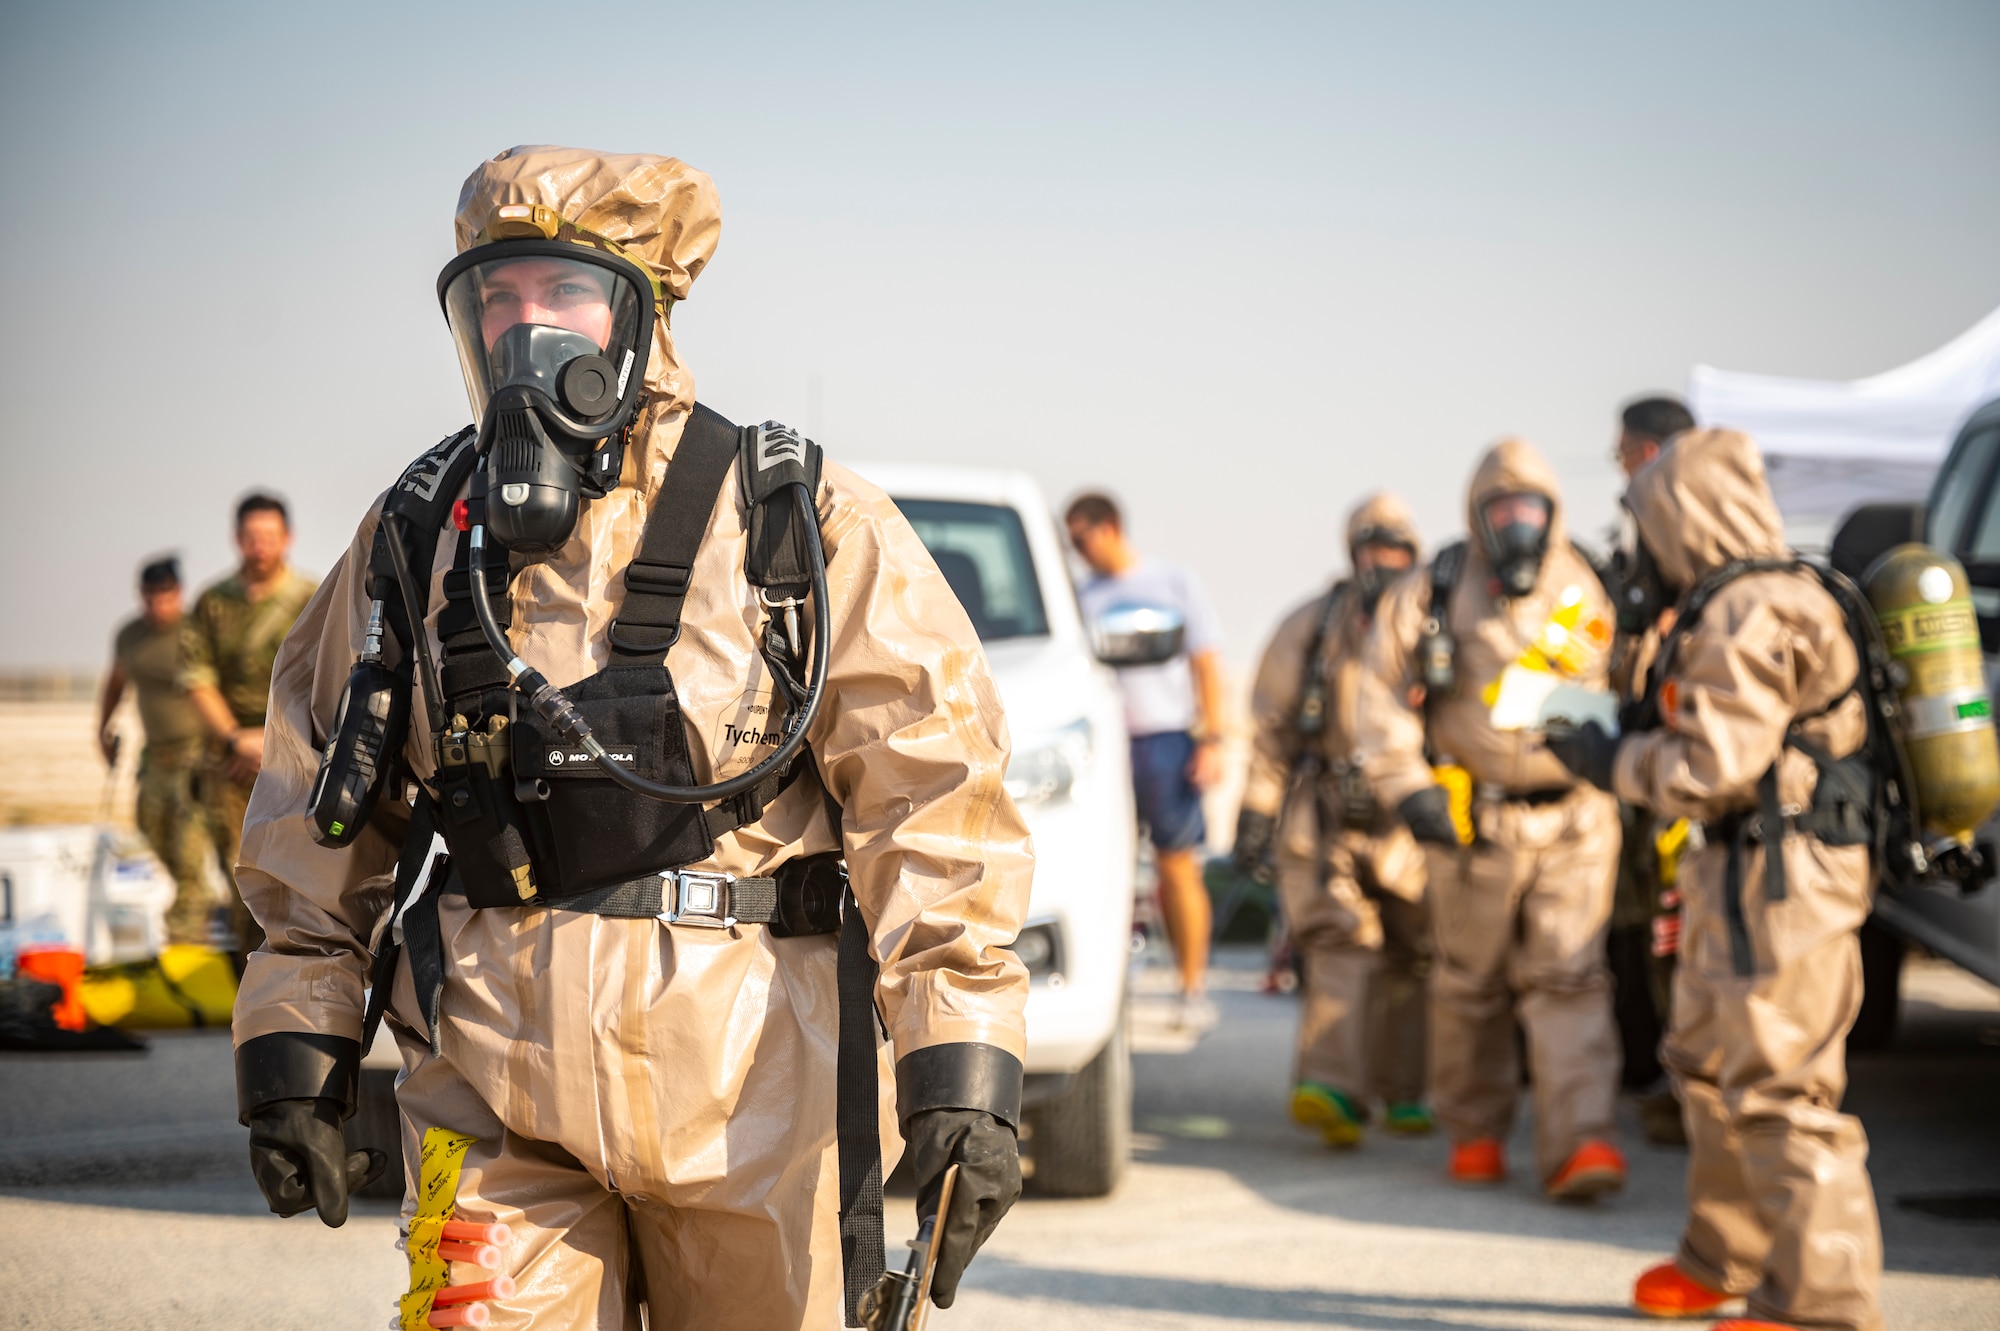 Military member in chemical gear begins walking towards the front entrance of a building.